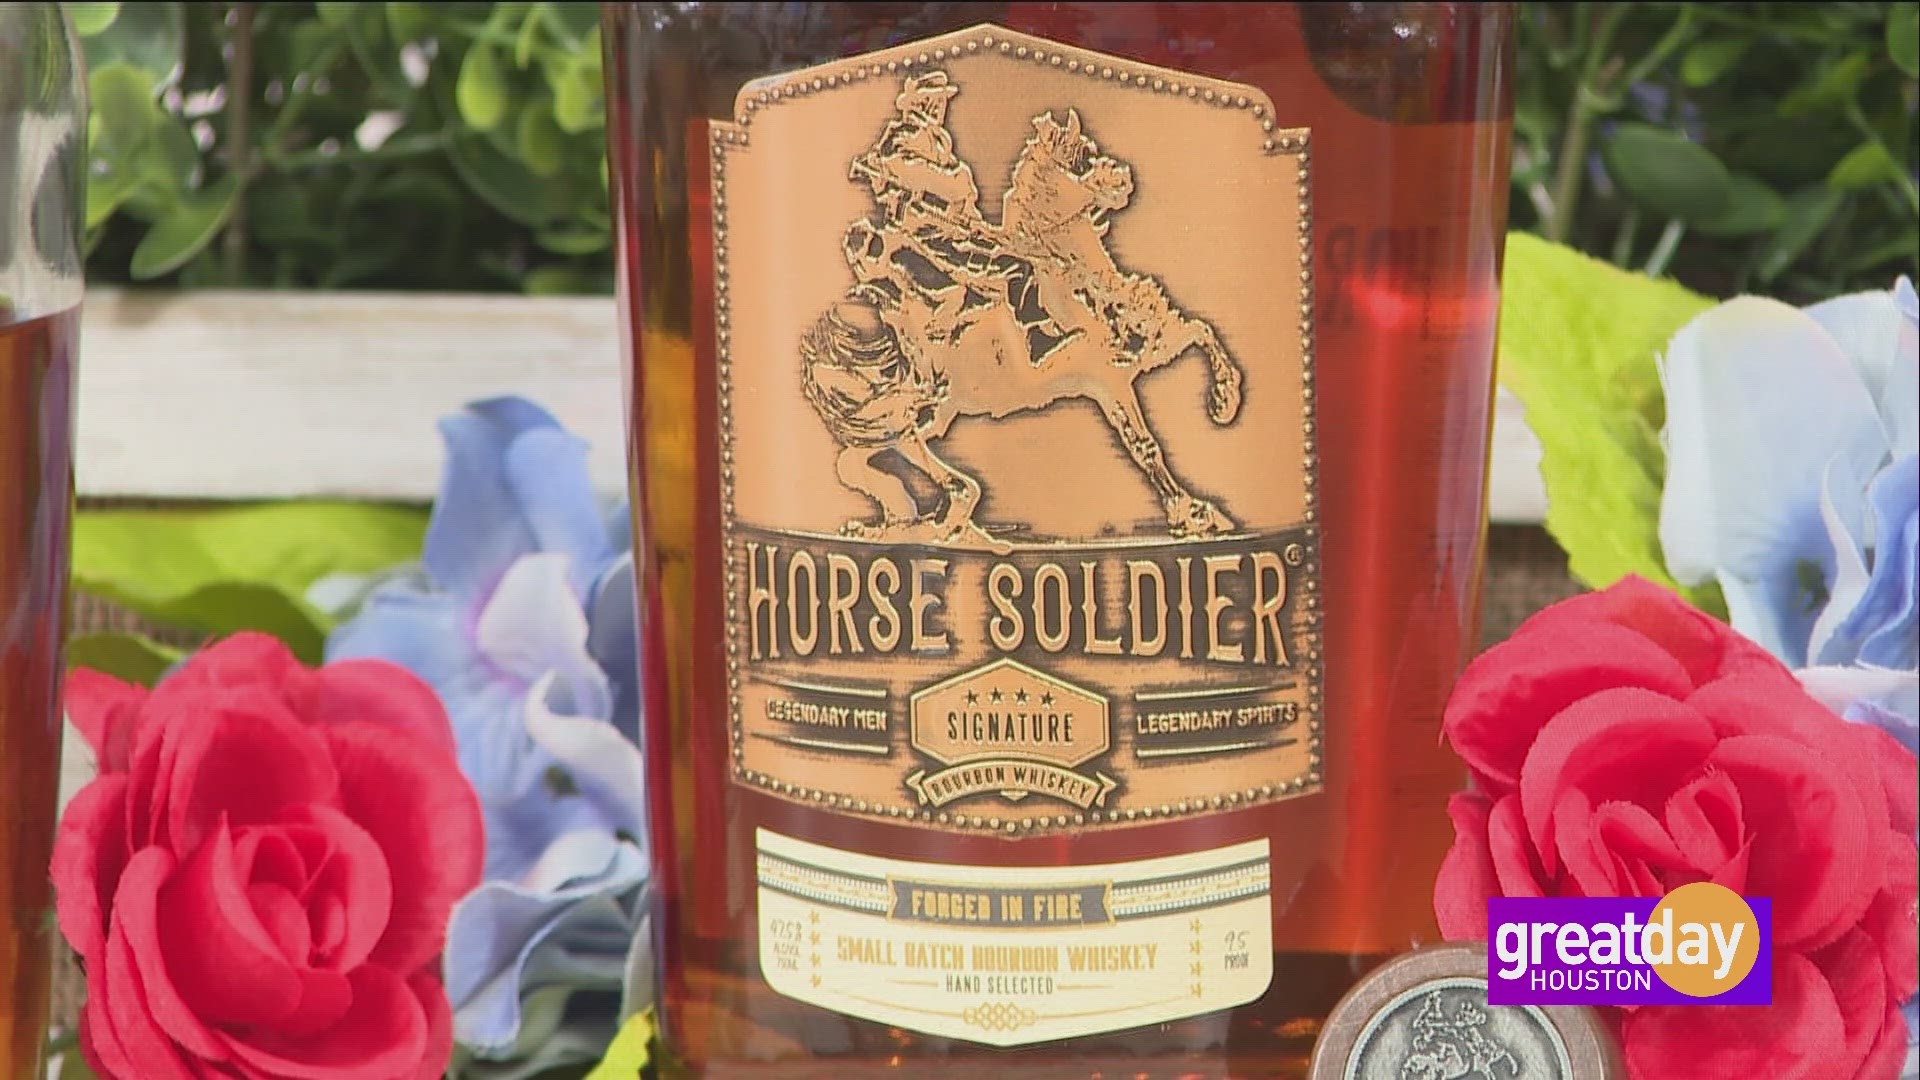 Horse Soldier Bourbon was created by former military members looking to honor their fellow service and the men and women.